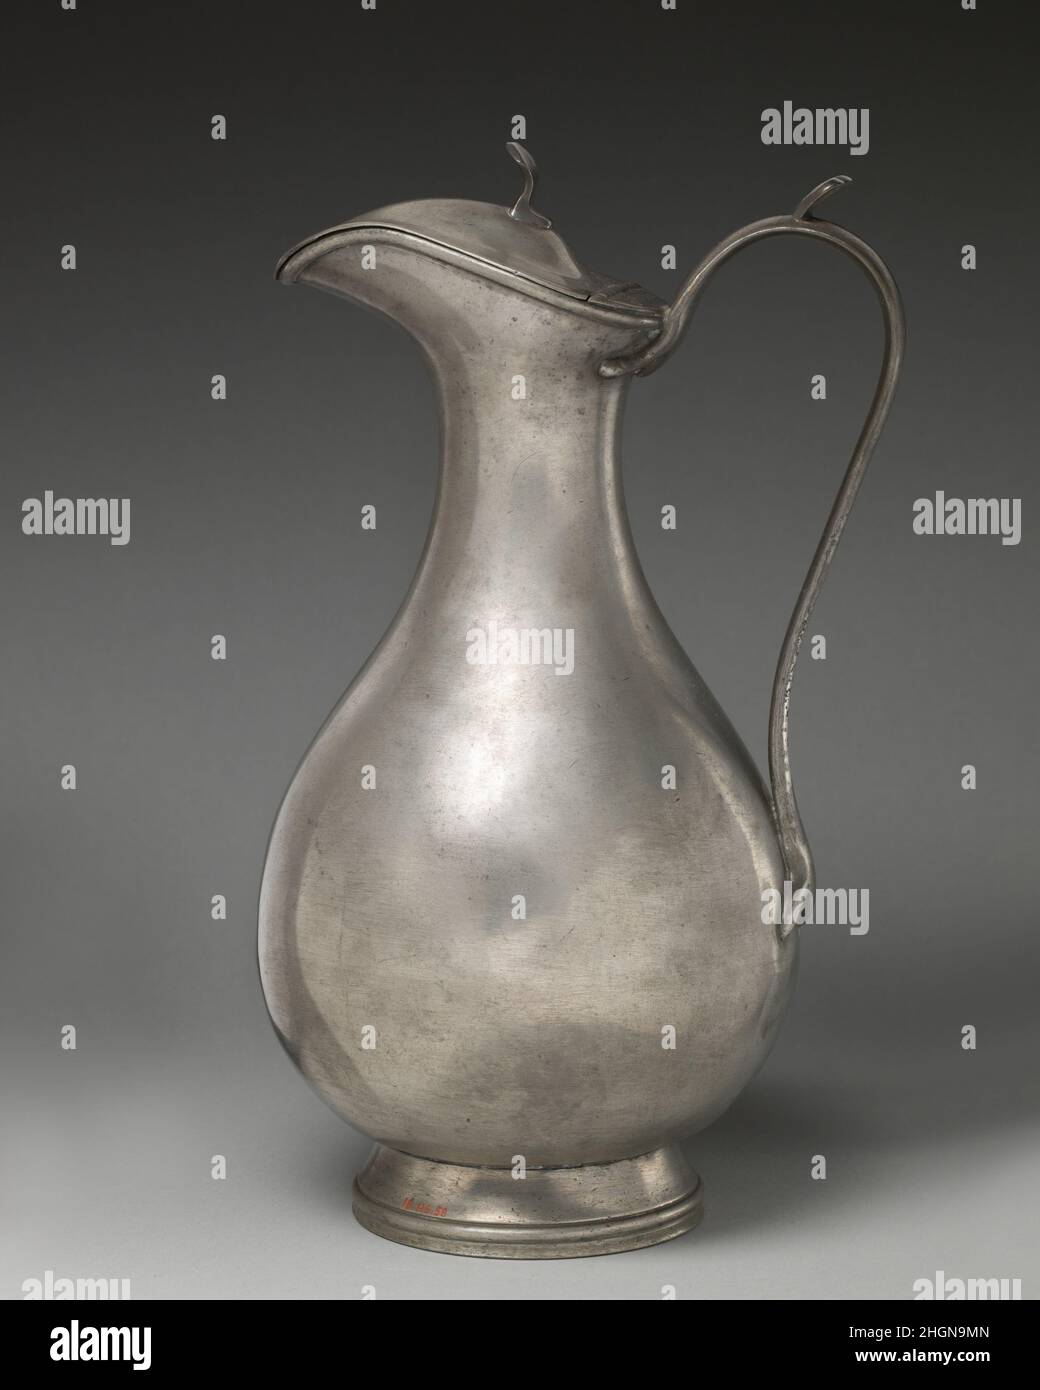 https://c8.alamy.com/comp/2HGN9MN/claret-jug-ca-187079-james-dixon-sons-british-the-british-manufacturer-james-dixon-sons-was-the-largest-producer-of-britannia-metal-during-the-nineteenth-century-britannia-metal-is-a-tin-alloy-similar-to-pewter-but-contains-a-higher-percentage-of-antimony-and-less-copper-or-lead-this-composition-made-the-metal-more-lustrous-and-malleable-britannia-metal-became-popular-in-victorian-domestic-wares-for-its-affordability-when-the-market-for-pewter-wares-experienced-a-revival-claret-jug-british-sheffield-ca-187079-britannia-metal-metalwork-base-metal-2HGN9MN.jpg